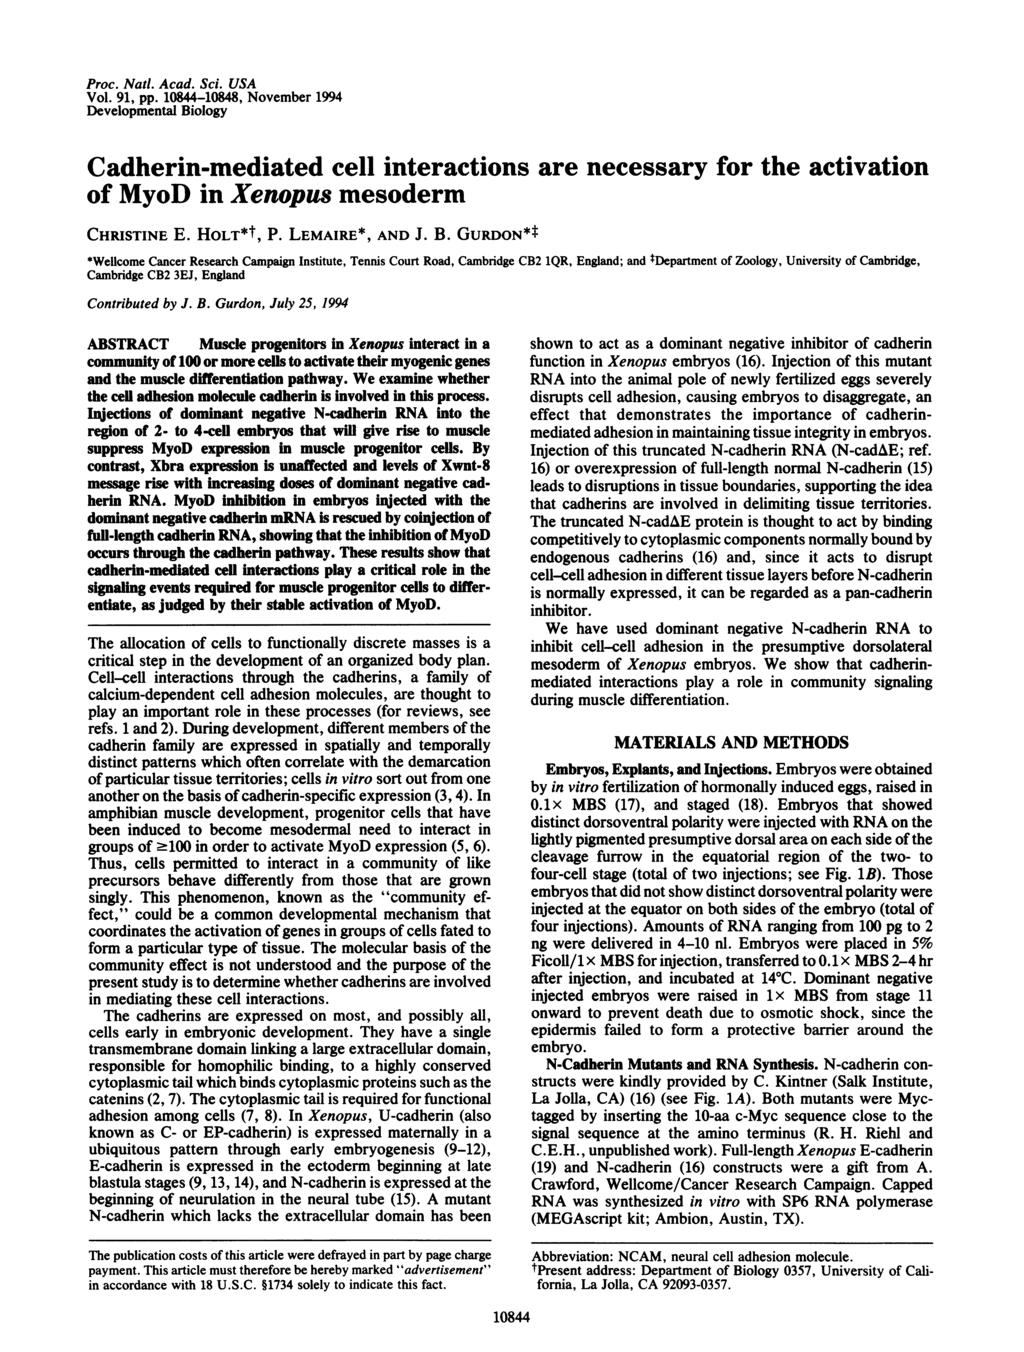 Proc. Nati. Acad. Sci. USA Vol. 91, pp. 10844-10848, November 1994 Developmental iology Cadherin-mediated cell interactions are necessary for the activation of MyoD in Xenopus mesoderm CHRISTINE E.